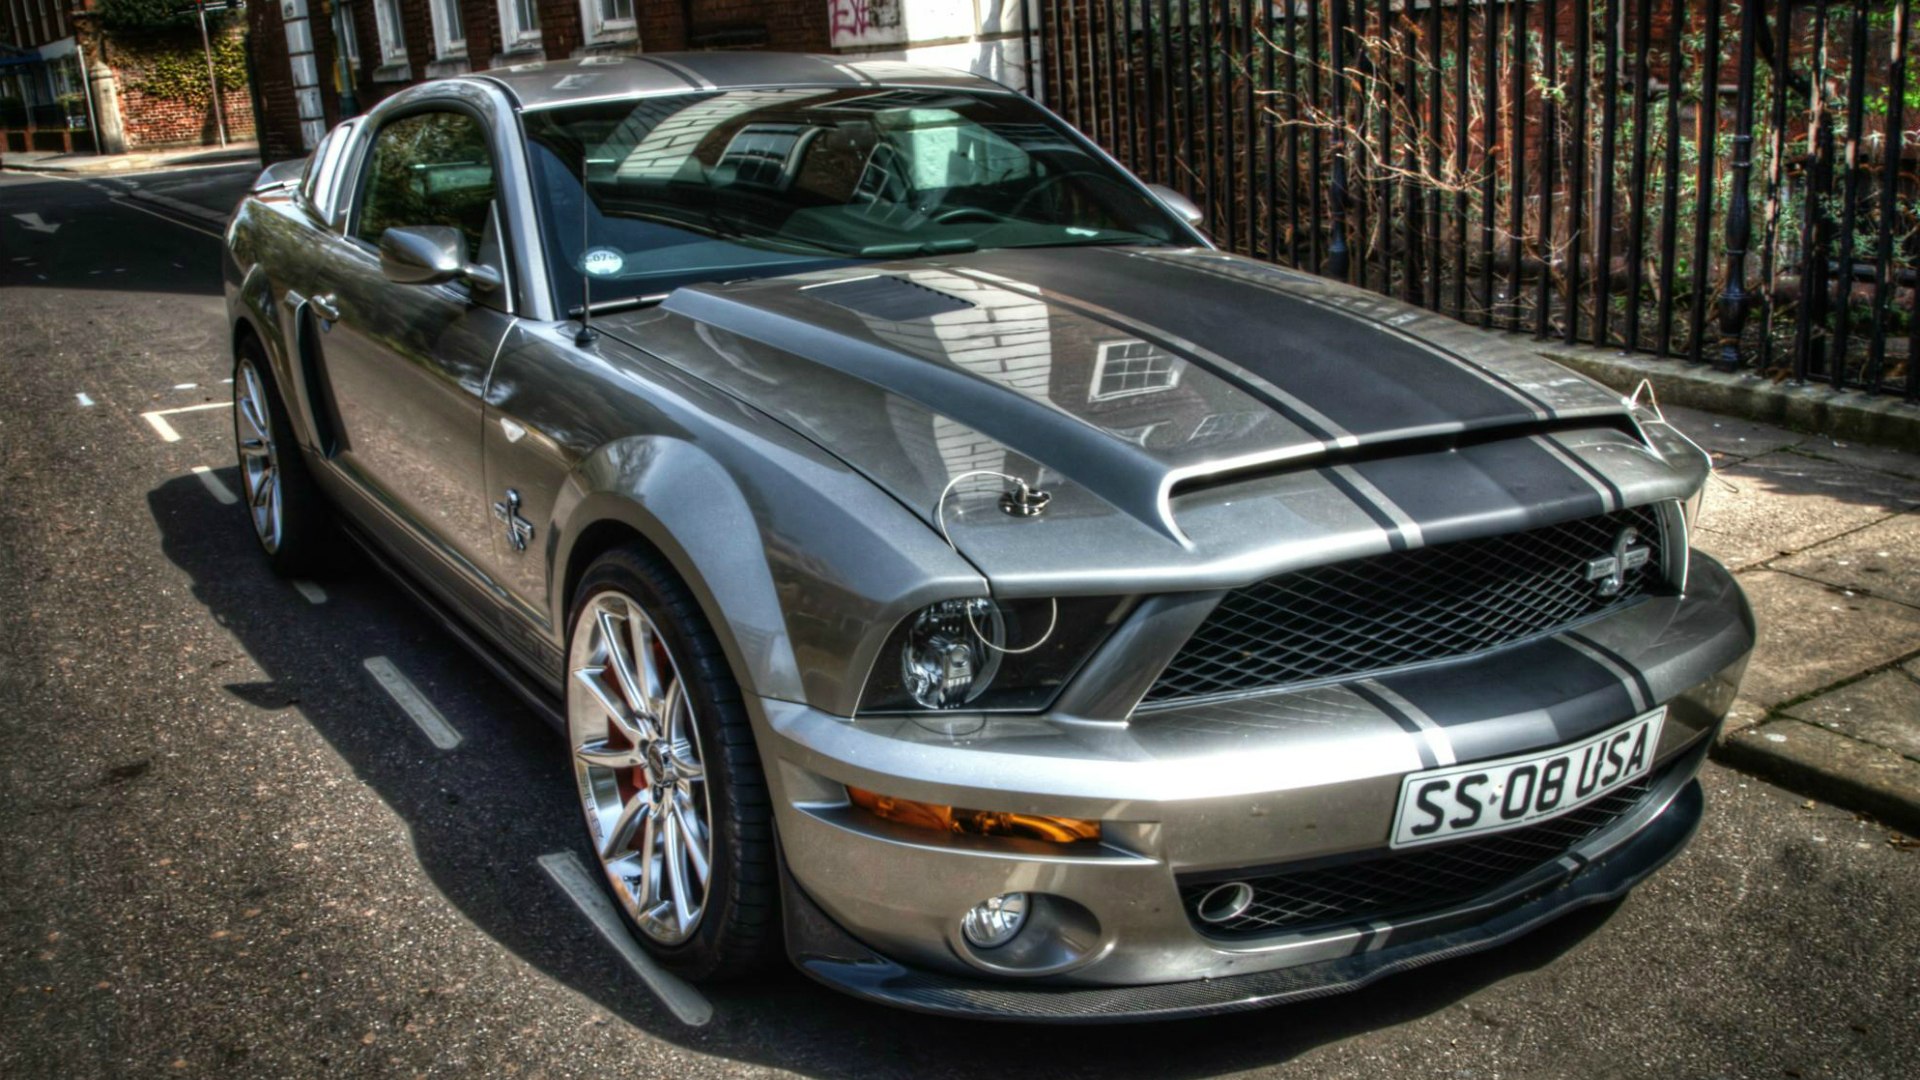 Автомобили Ford Mustang Shelby GT500.